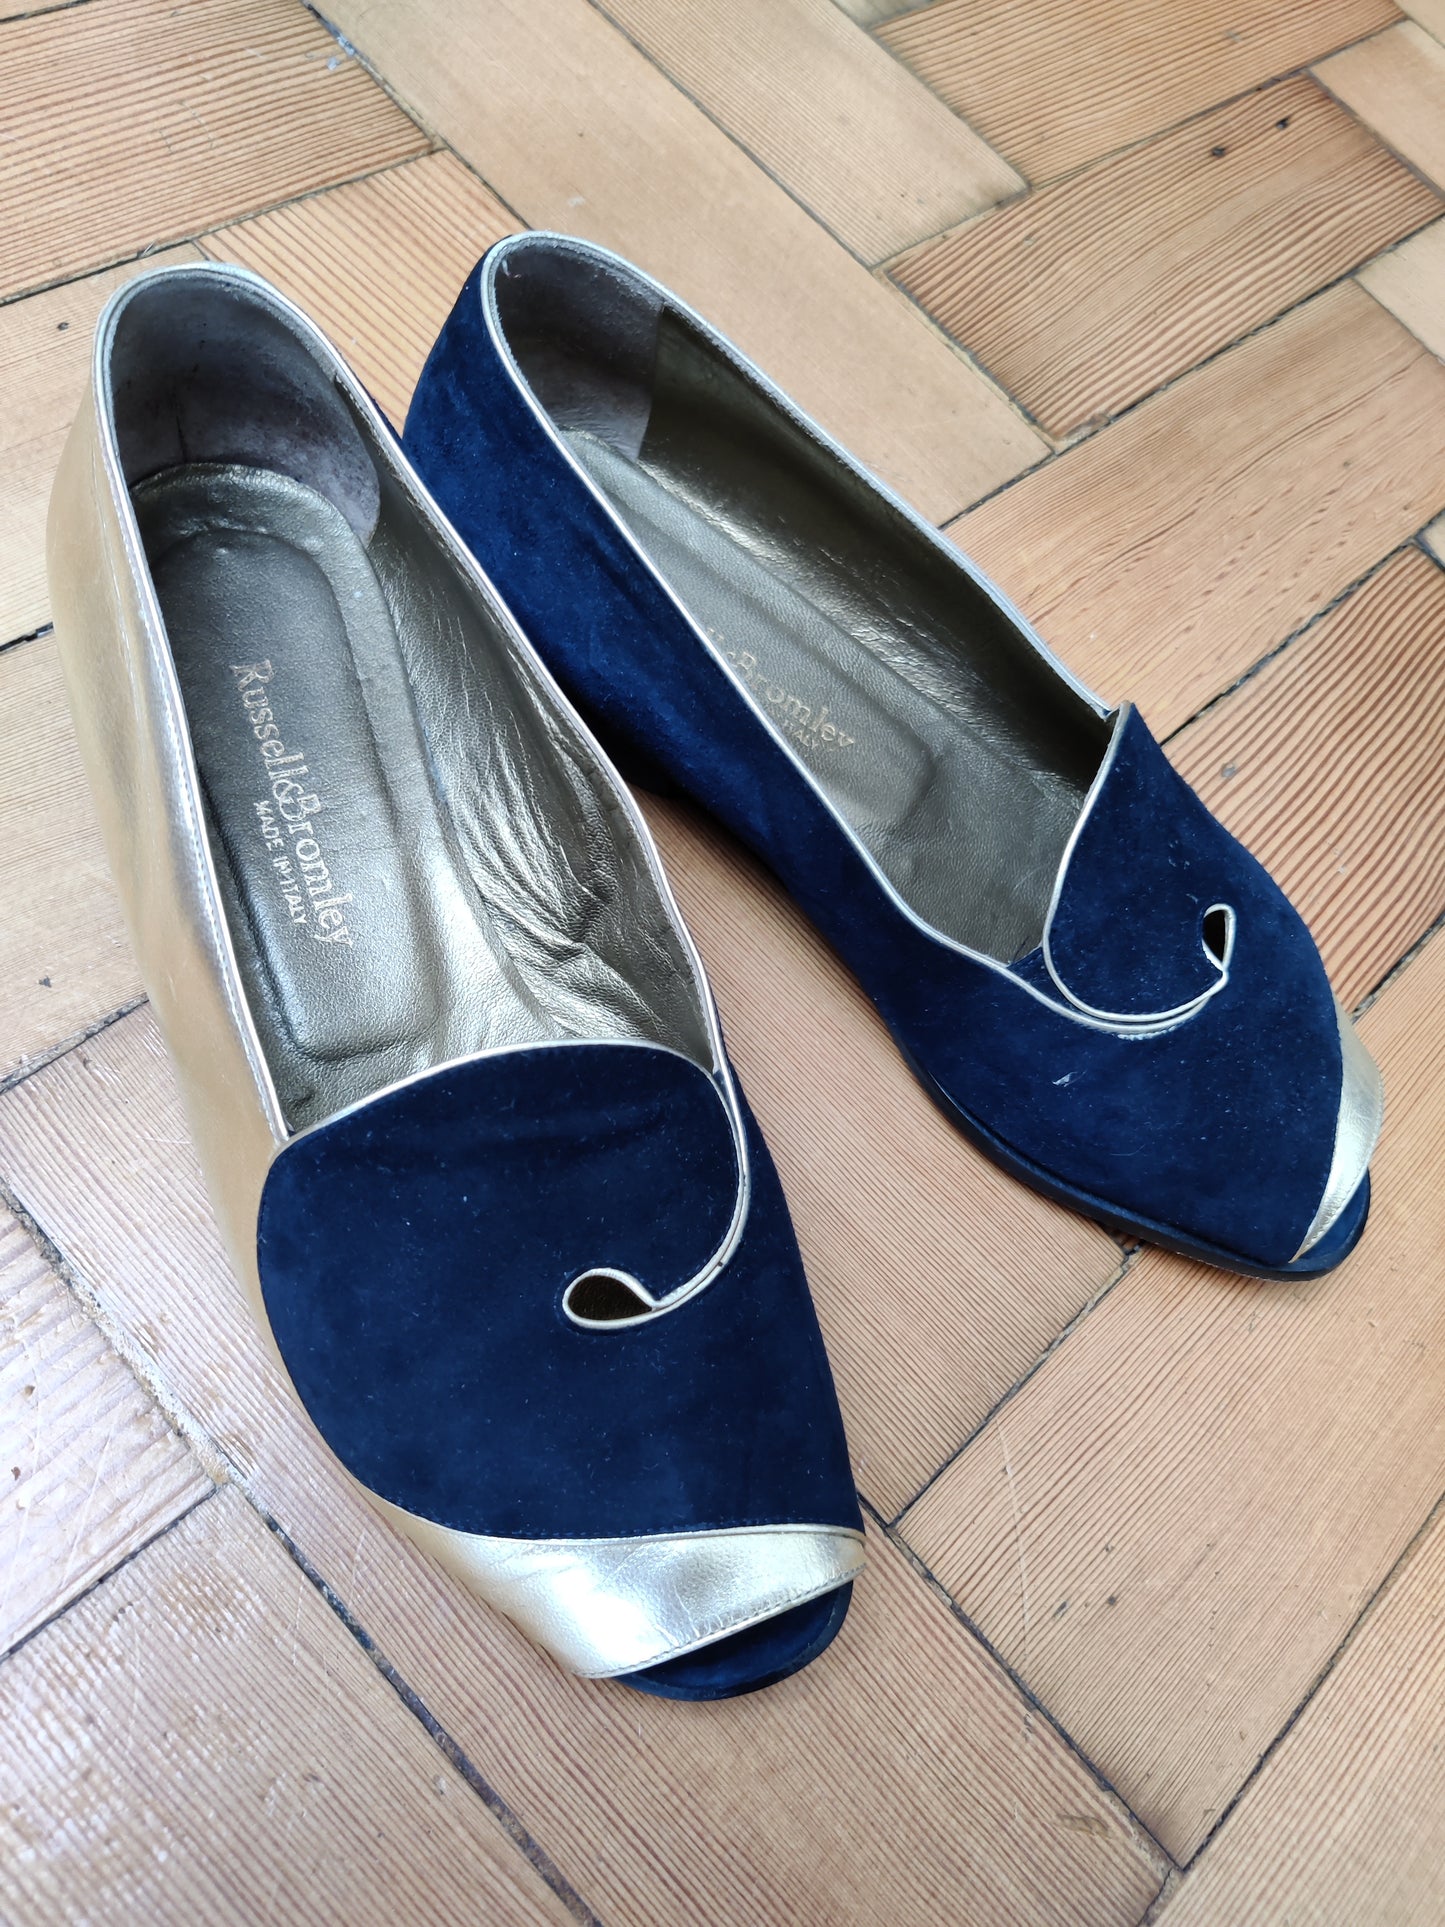 Size 4.5 Russell & Bromley flat shoes